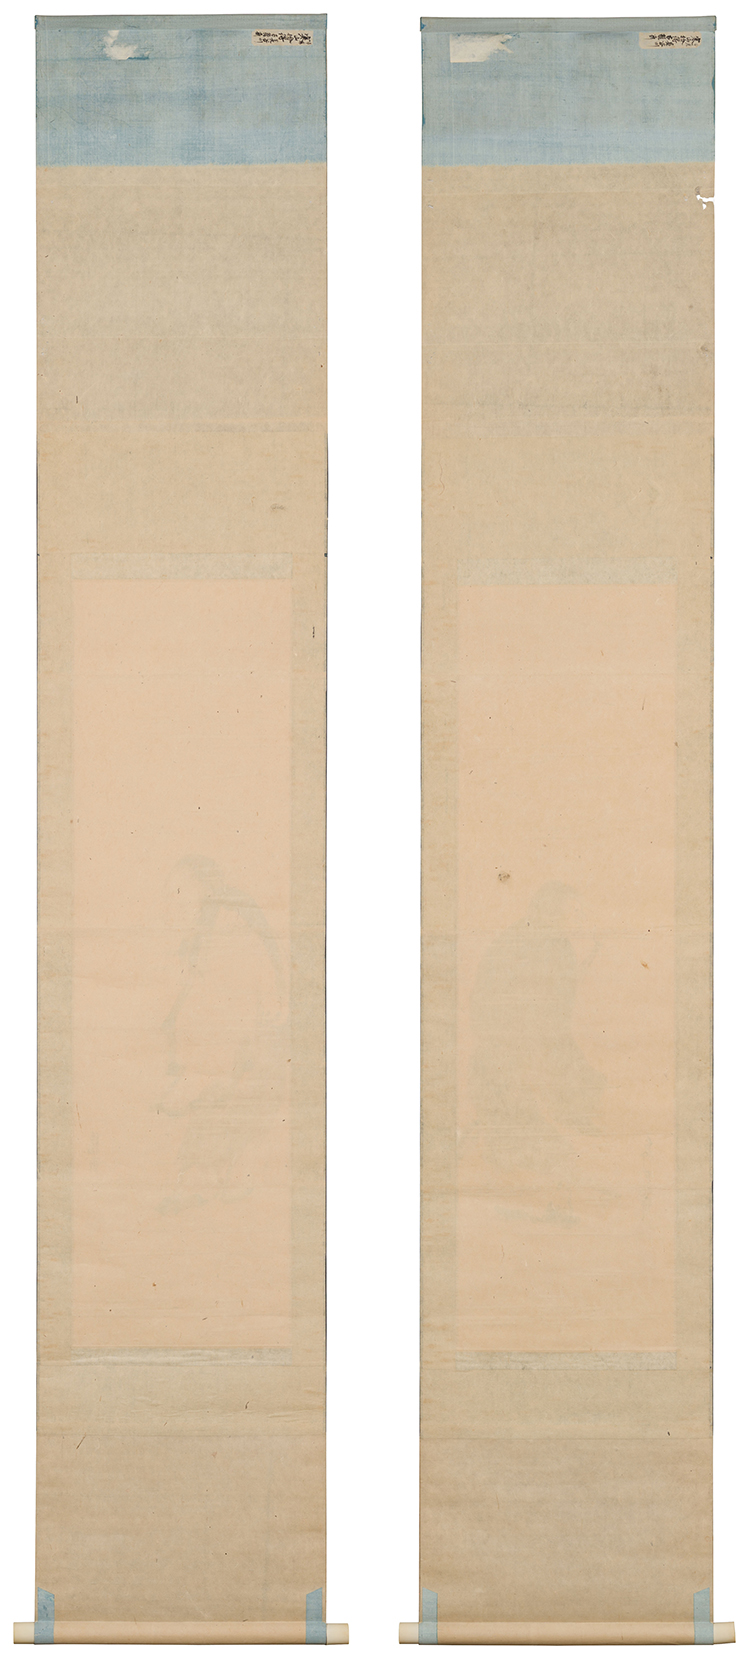 Japanese School
Set of Two Zen Paintings of Kanzan and Jittoku, Edo Period, Early 19th Century by  Japanese Art